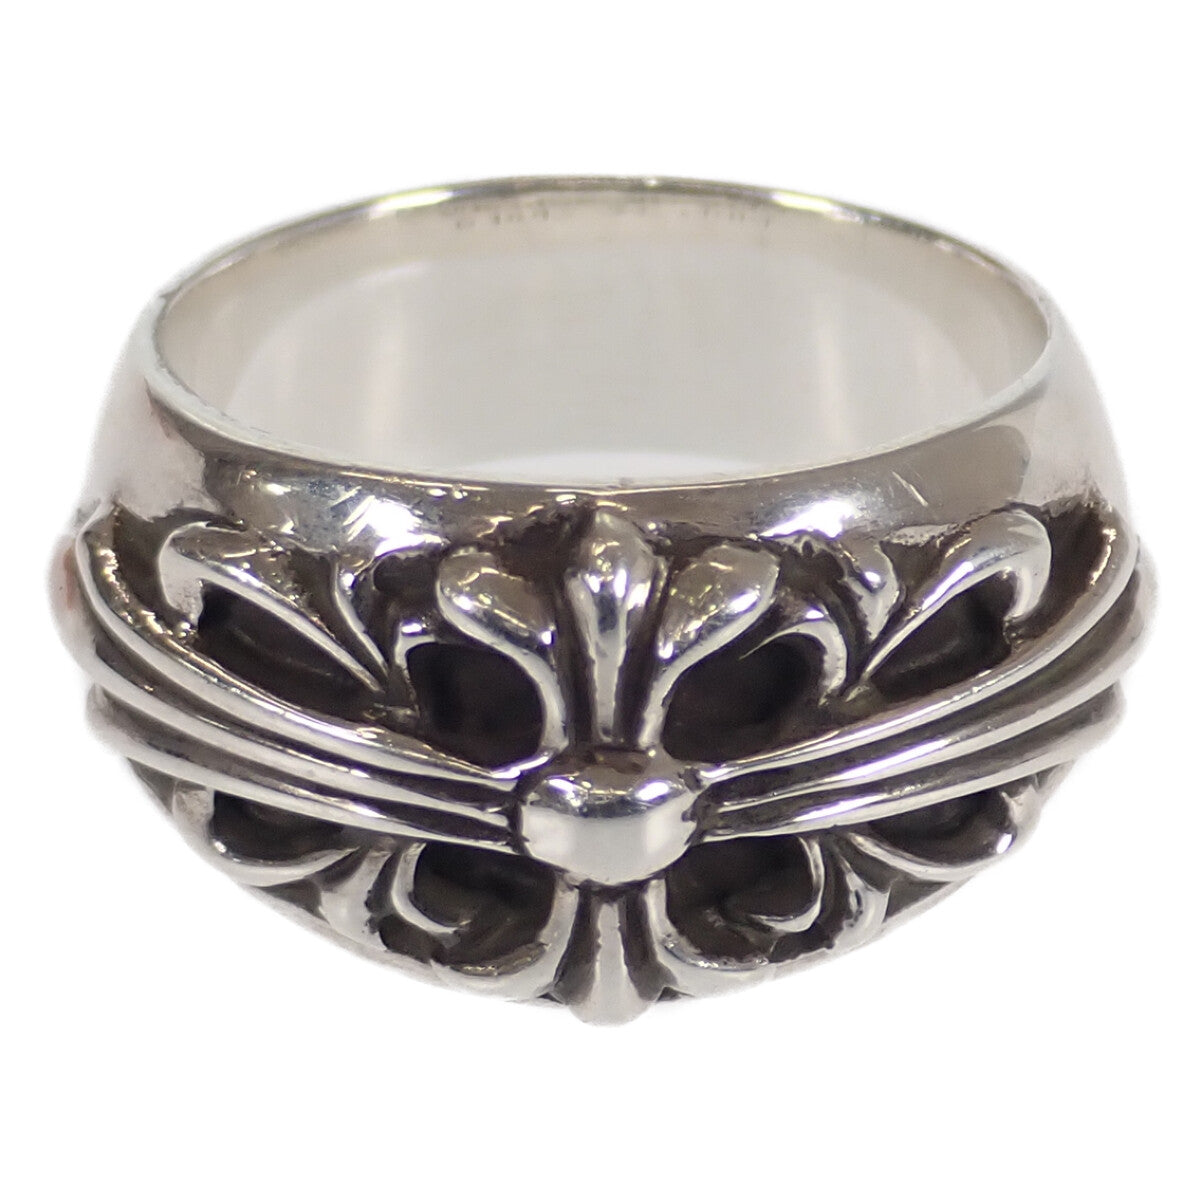 Silver Floral Cross Ring 2356-304-0500-9110